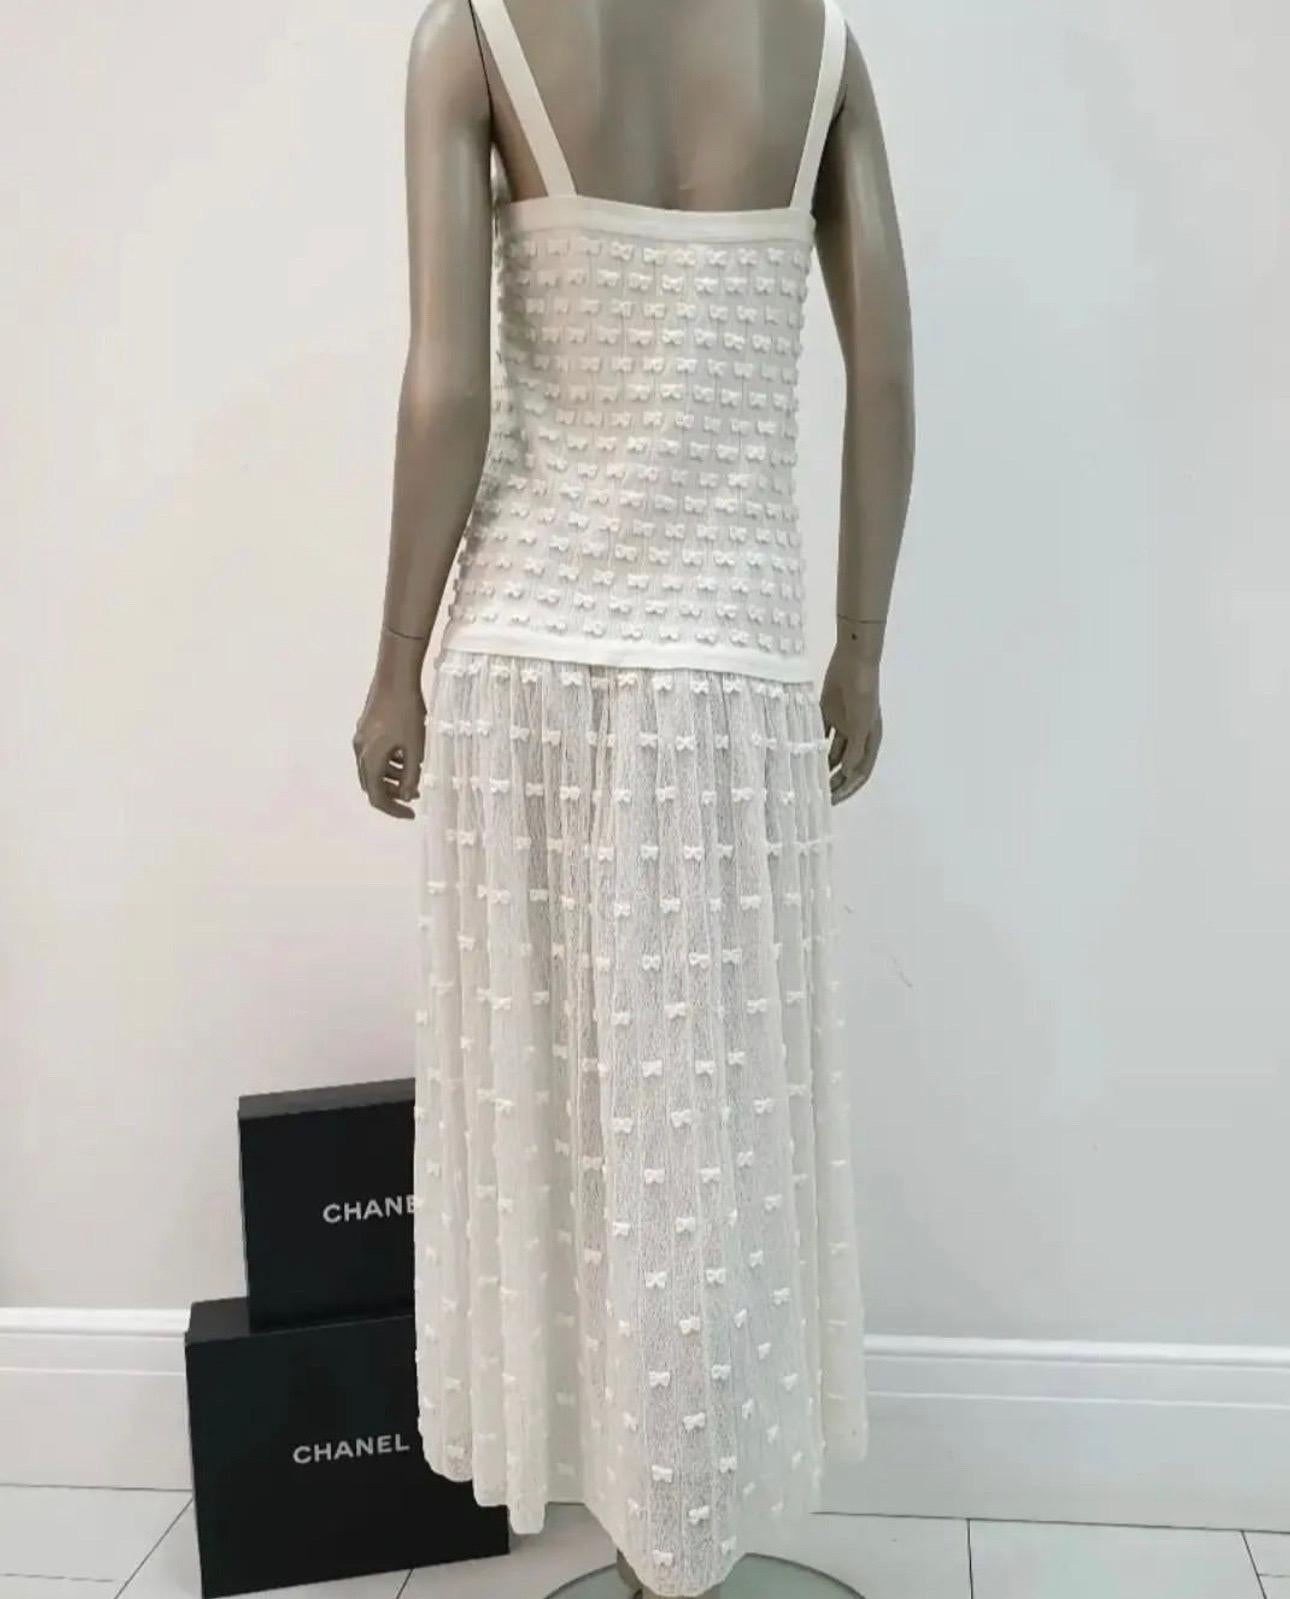 Chanel dress from Spring of 2014

sz.38

Very good condition. 